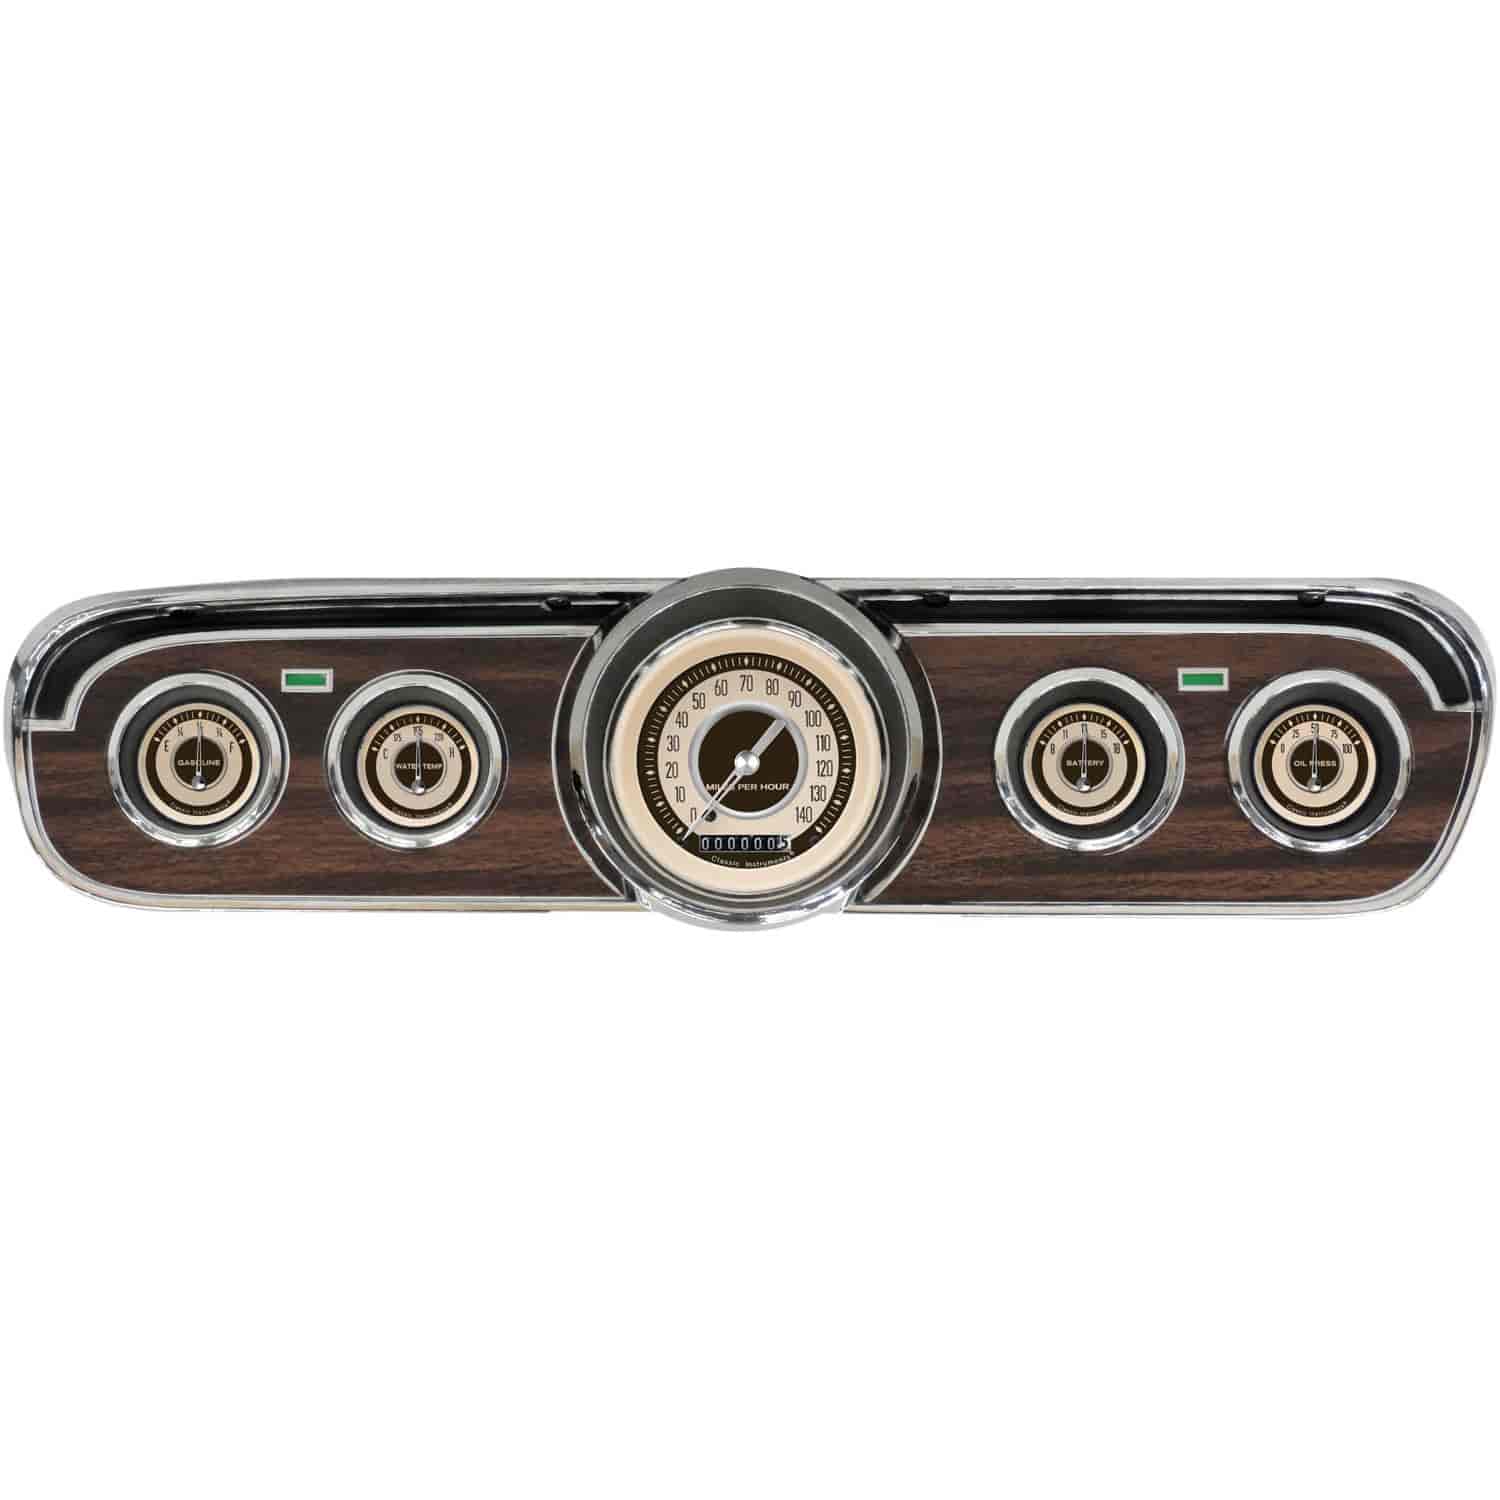 Nostalgia VT Series Gauge Package 1965-66 Mustang Includes: